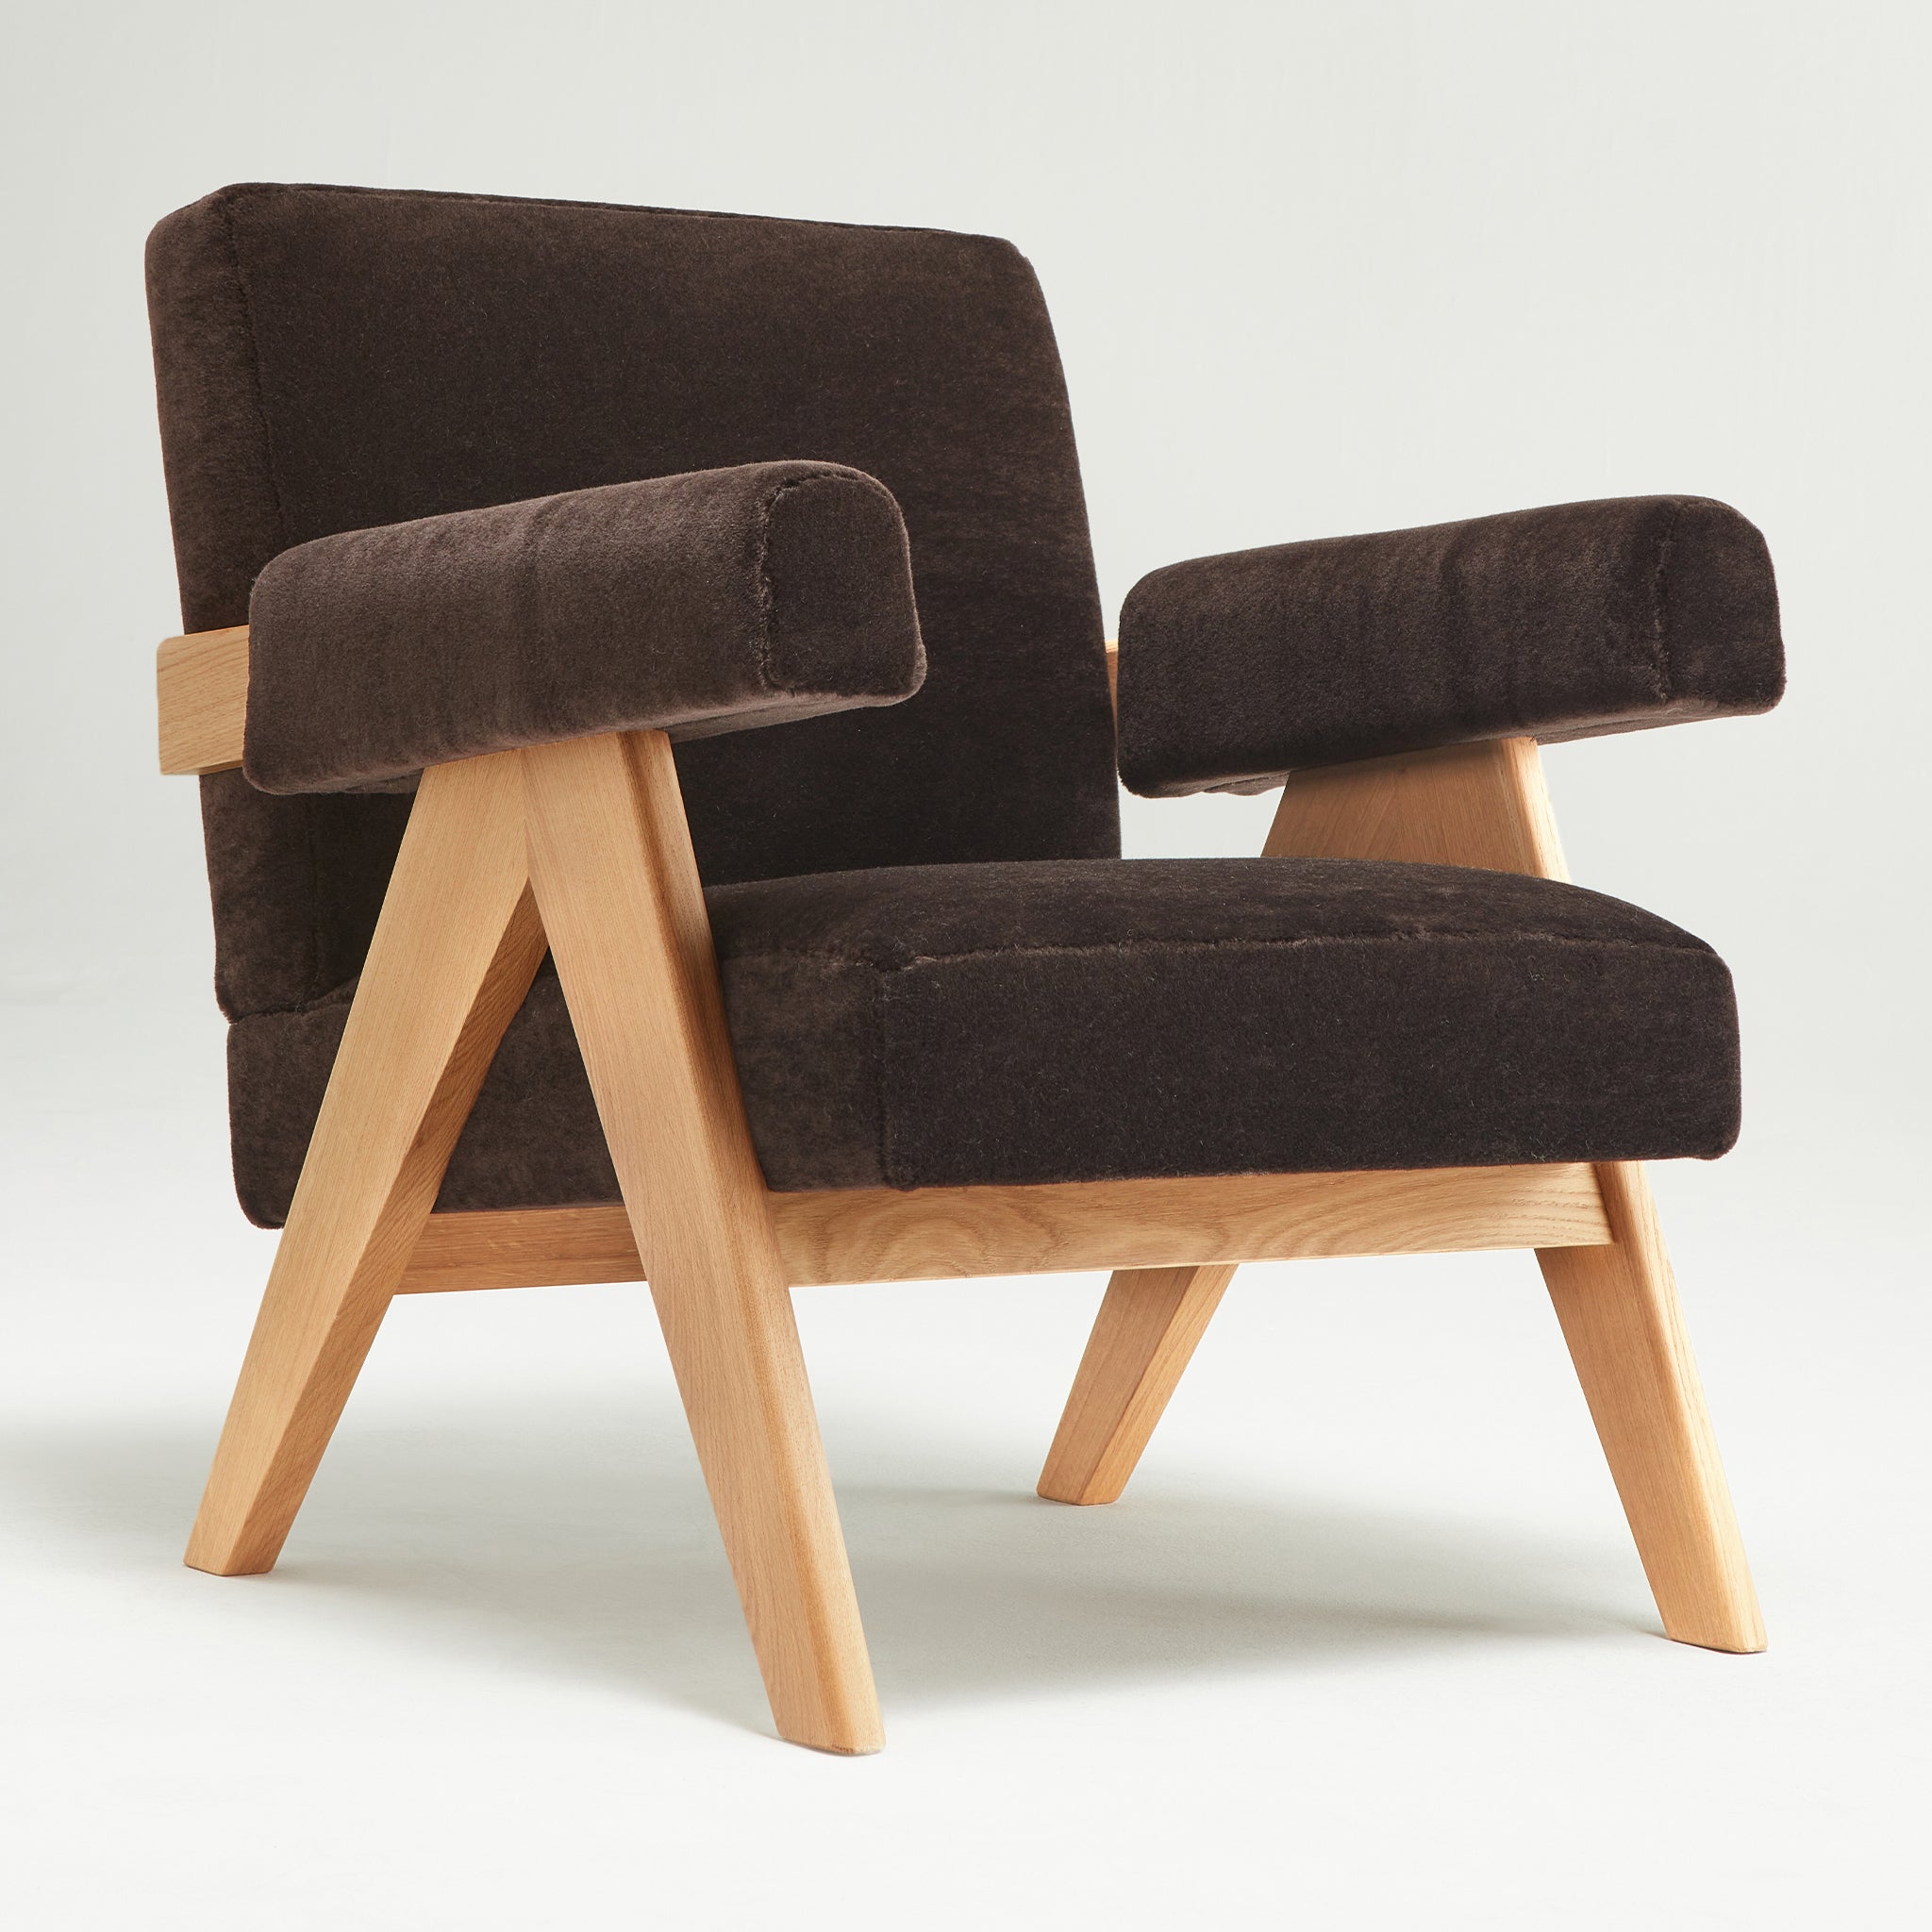 Main view of an authentic chandigarh lounge chair, pierre jeanneret era, natural oak frame, pierre frey choco teddy mohair upholstery, by Klarel #K35-31